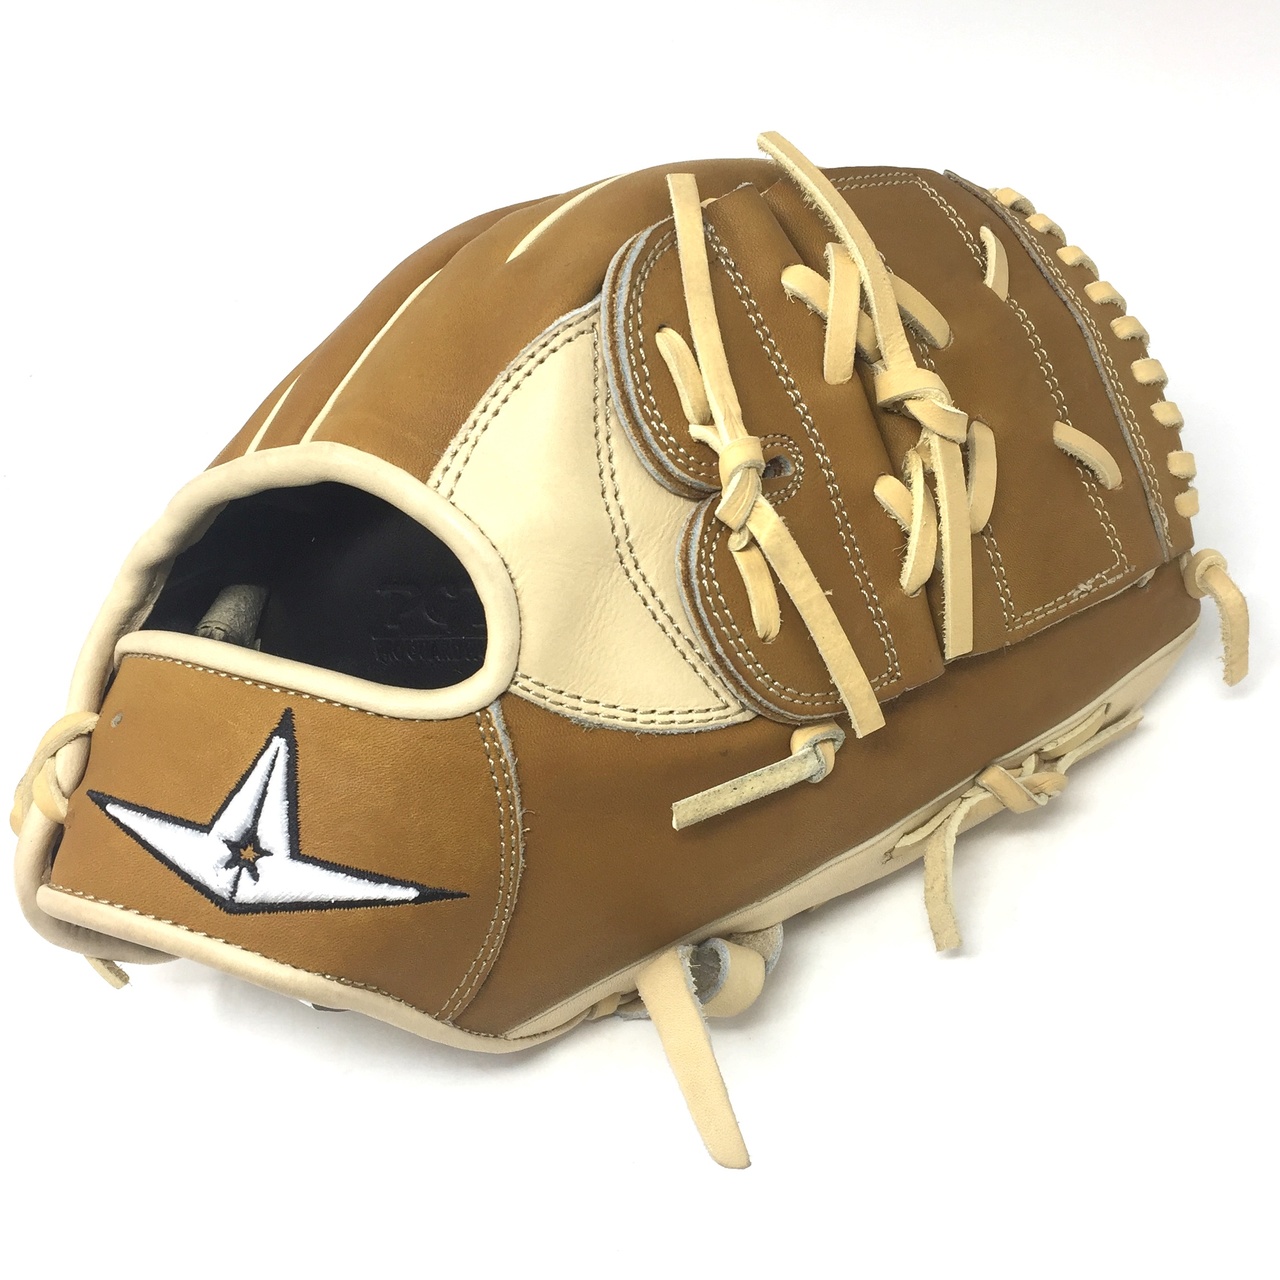 all-star-pro-elite-12-inch-baseball-glove-fgas-12002p-cream-saddle-tan-right-hand-throw FGAS-12002P-CRSDL-RightHandThrow All-Star 029343048135 <span>What makes Pro Elite the most trusted mitt behind the dish